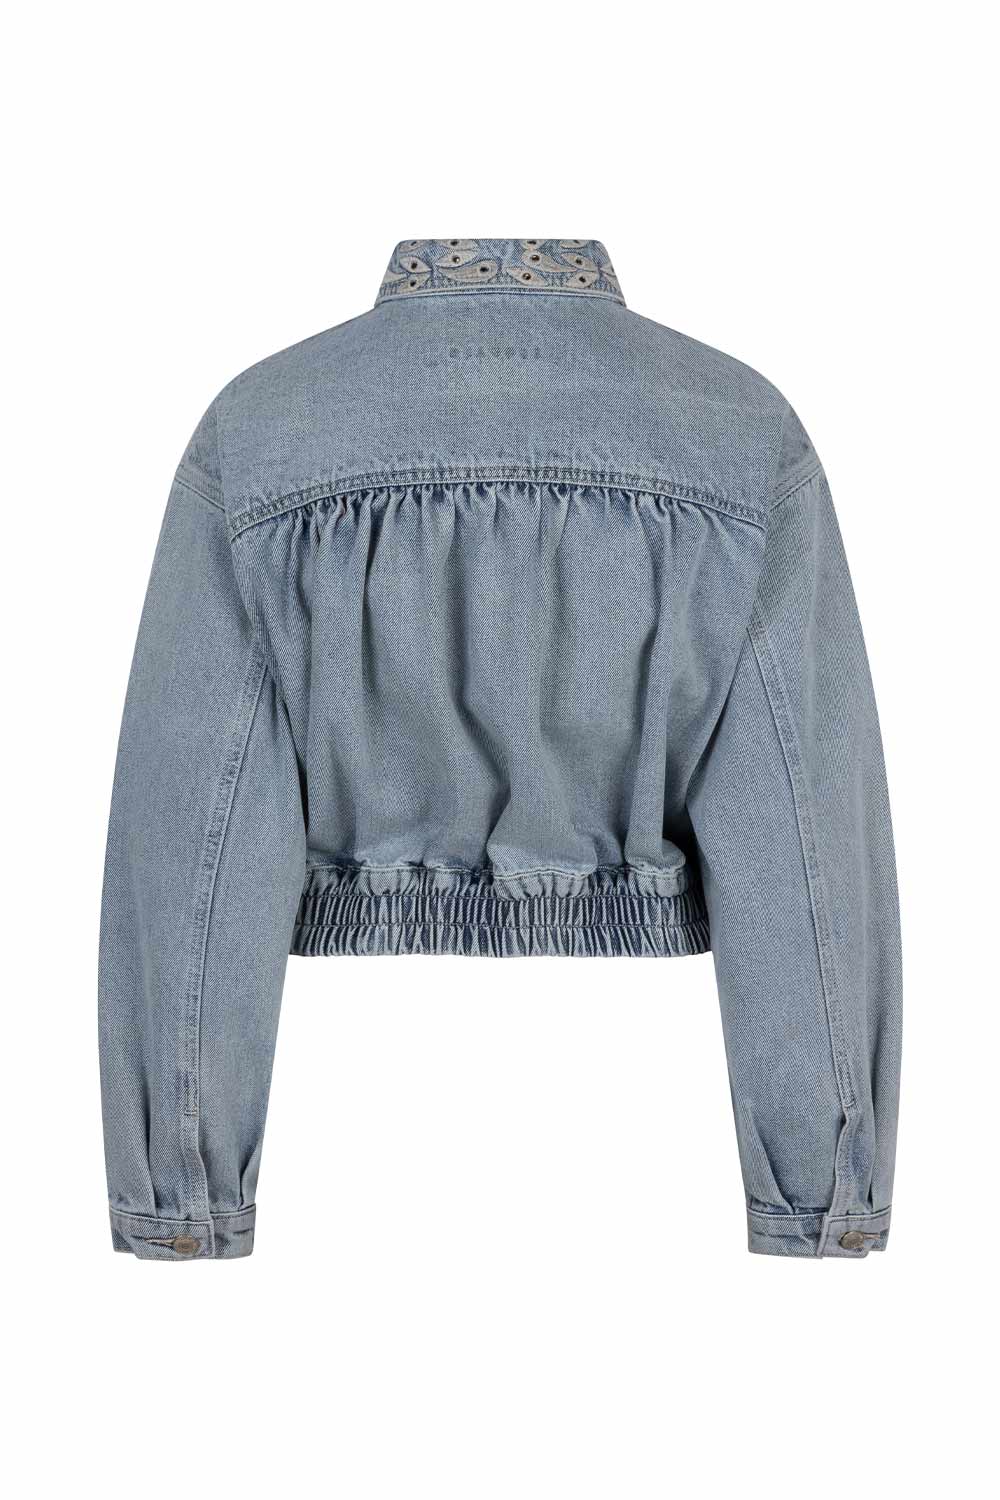 Back view of Esqualo (SP2412002) Women's Long Sleeve Cropped Blue Jean Jacket With Embroidery & Rhinestones on Collar and Front Panels